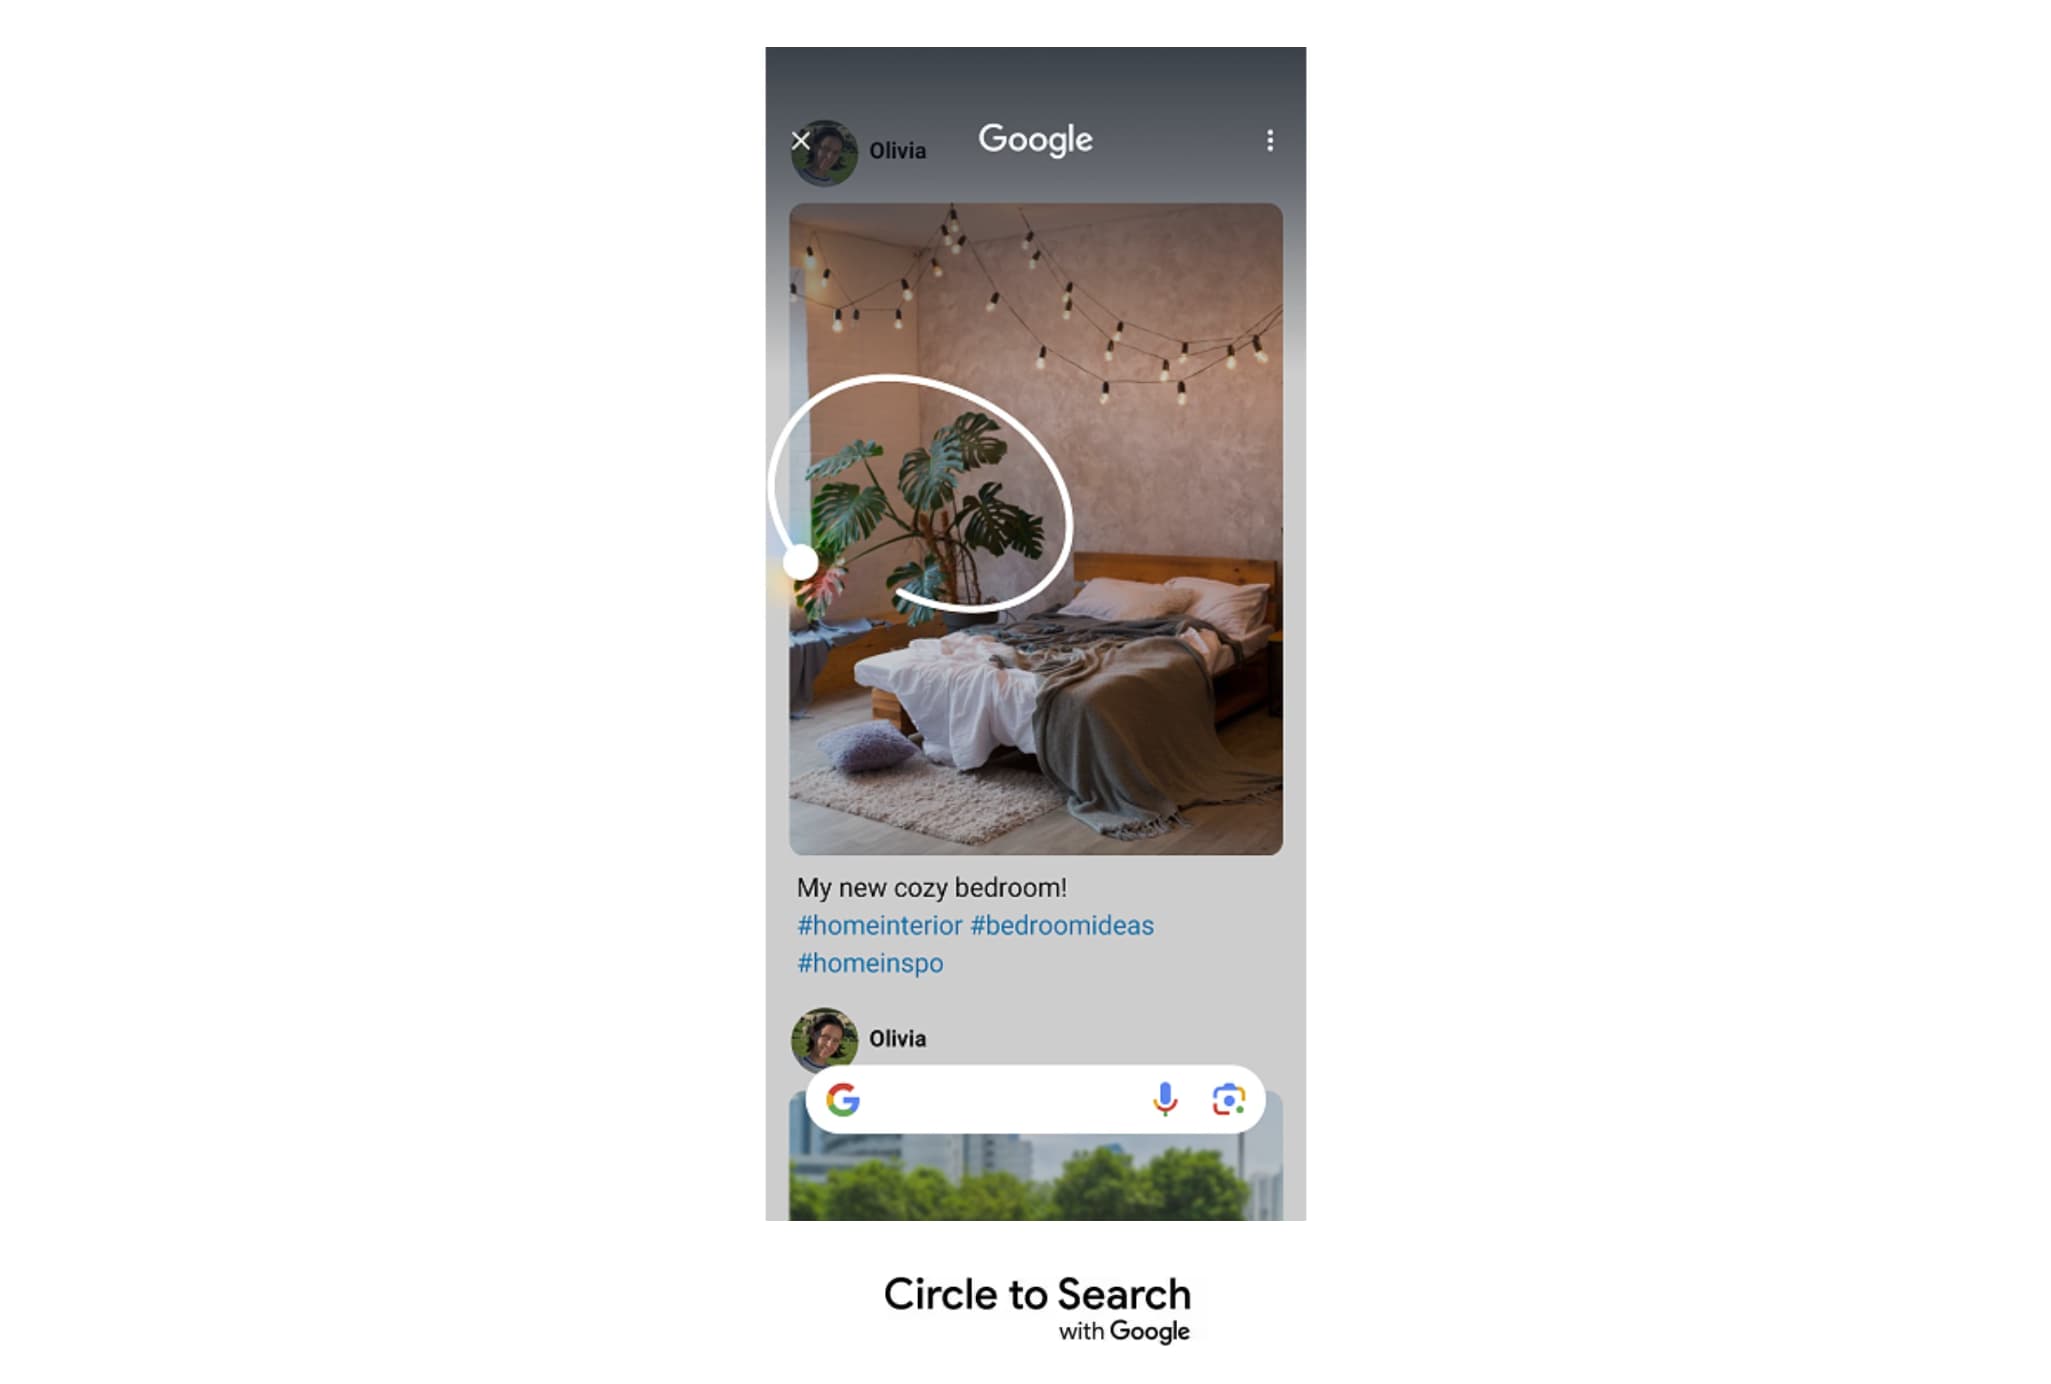 Google’s Circle to Search is rolling out to everyone, but you can’t activate it just yet